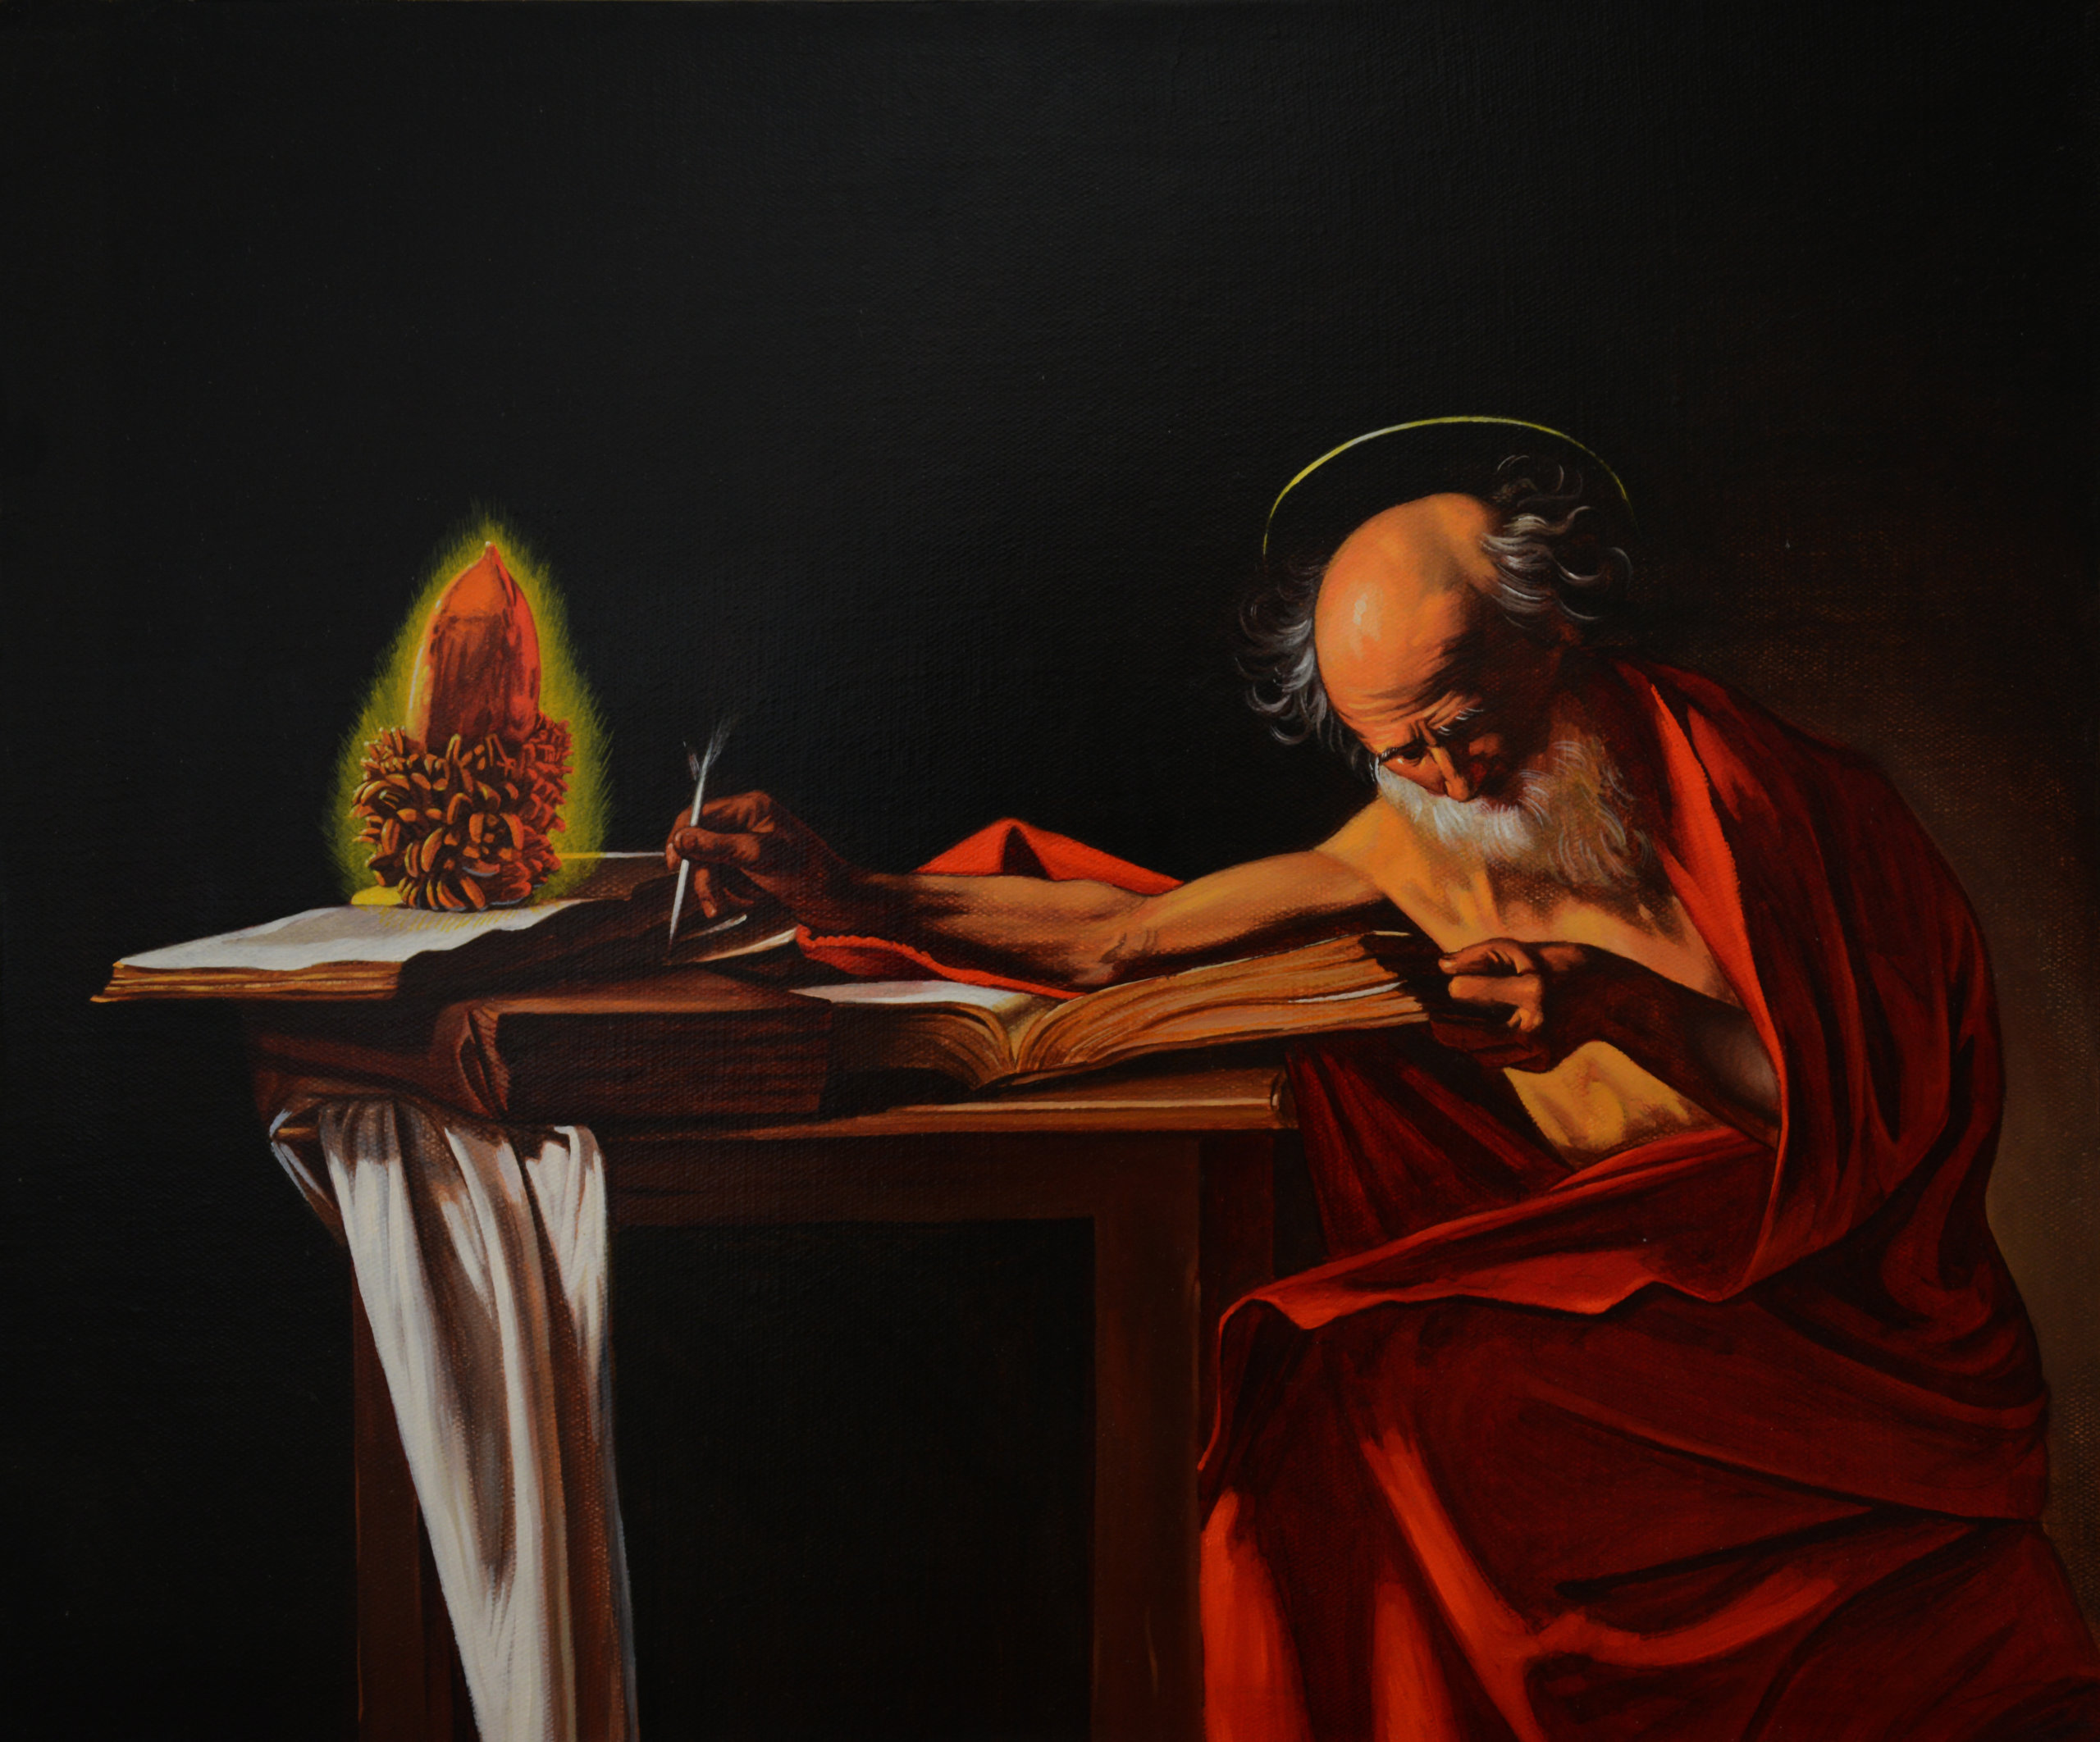 Cang Xin, It often slowly comes when I am writing, 2013, oil on canvas, 50x60cm